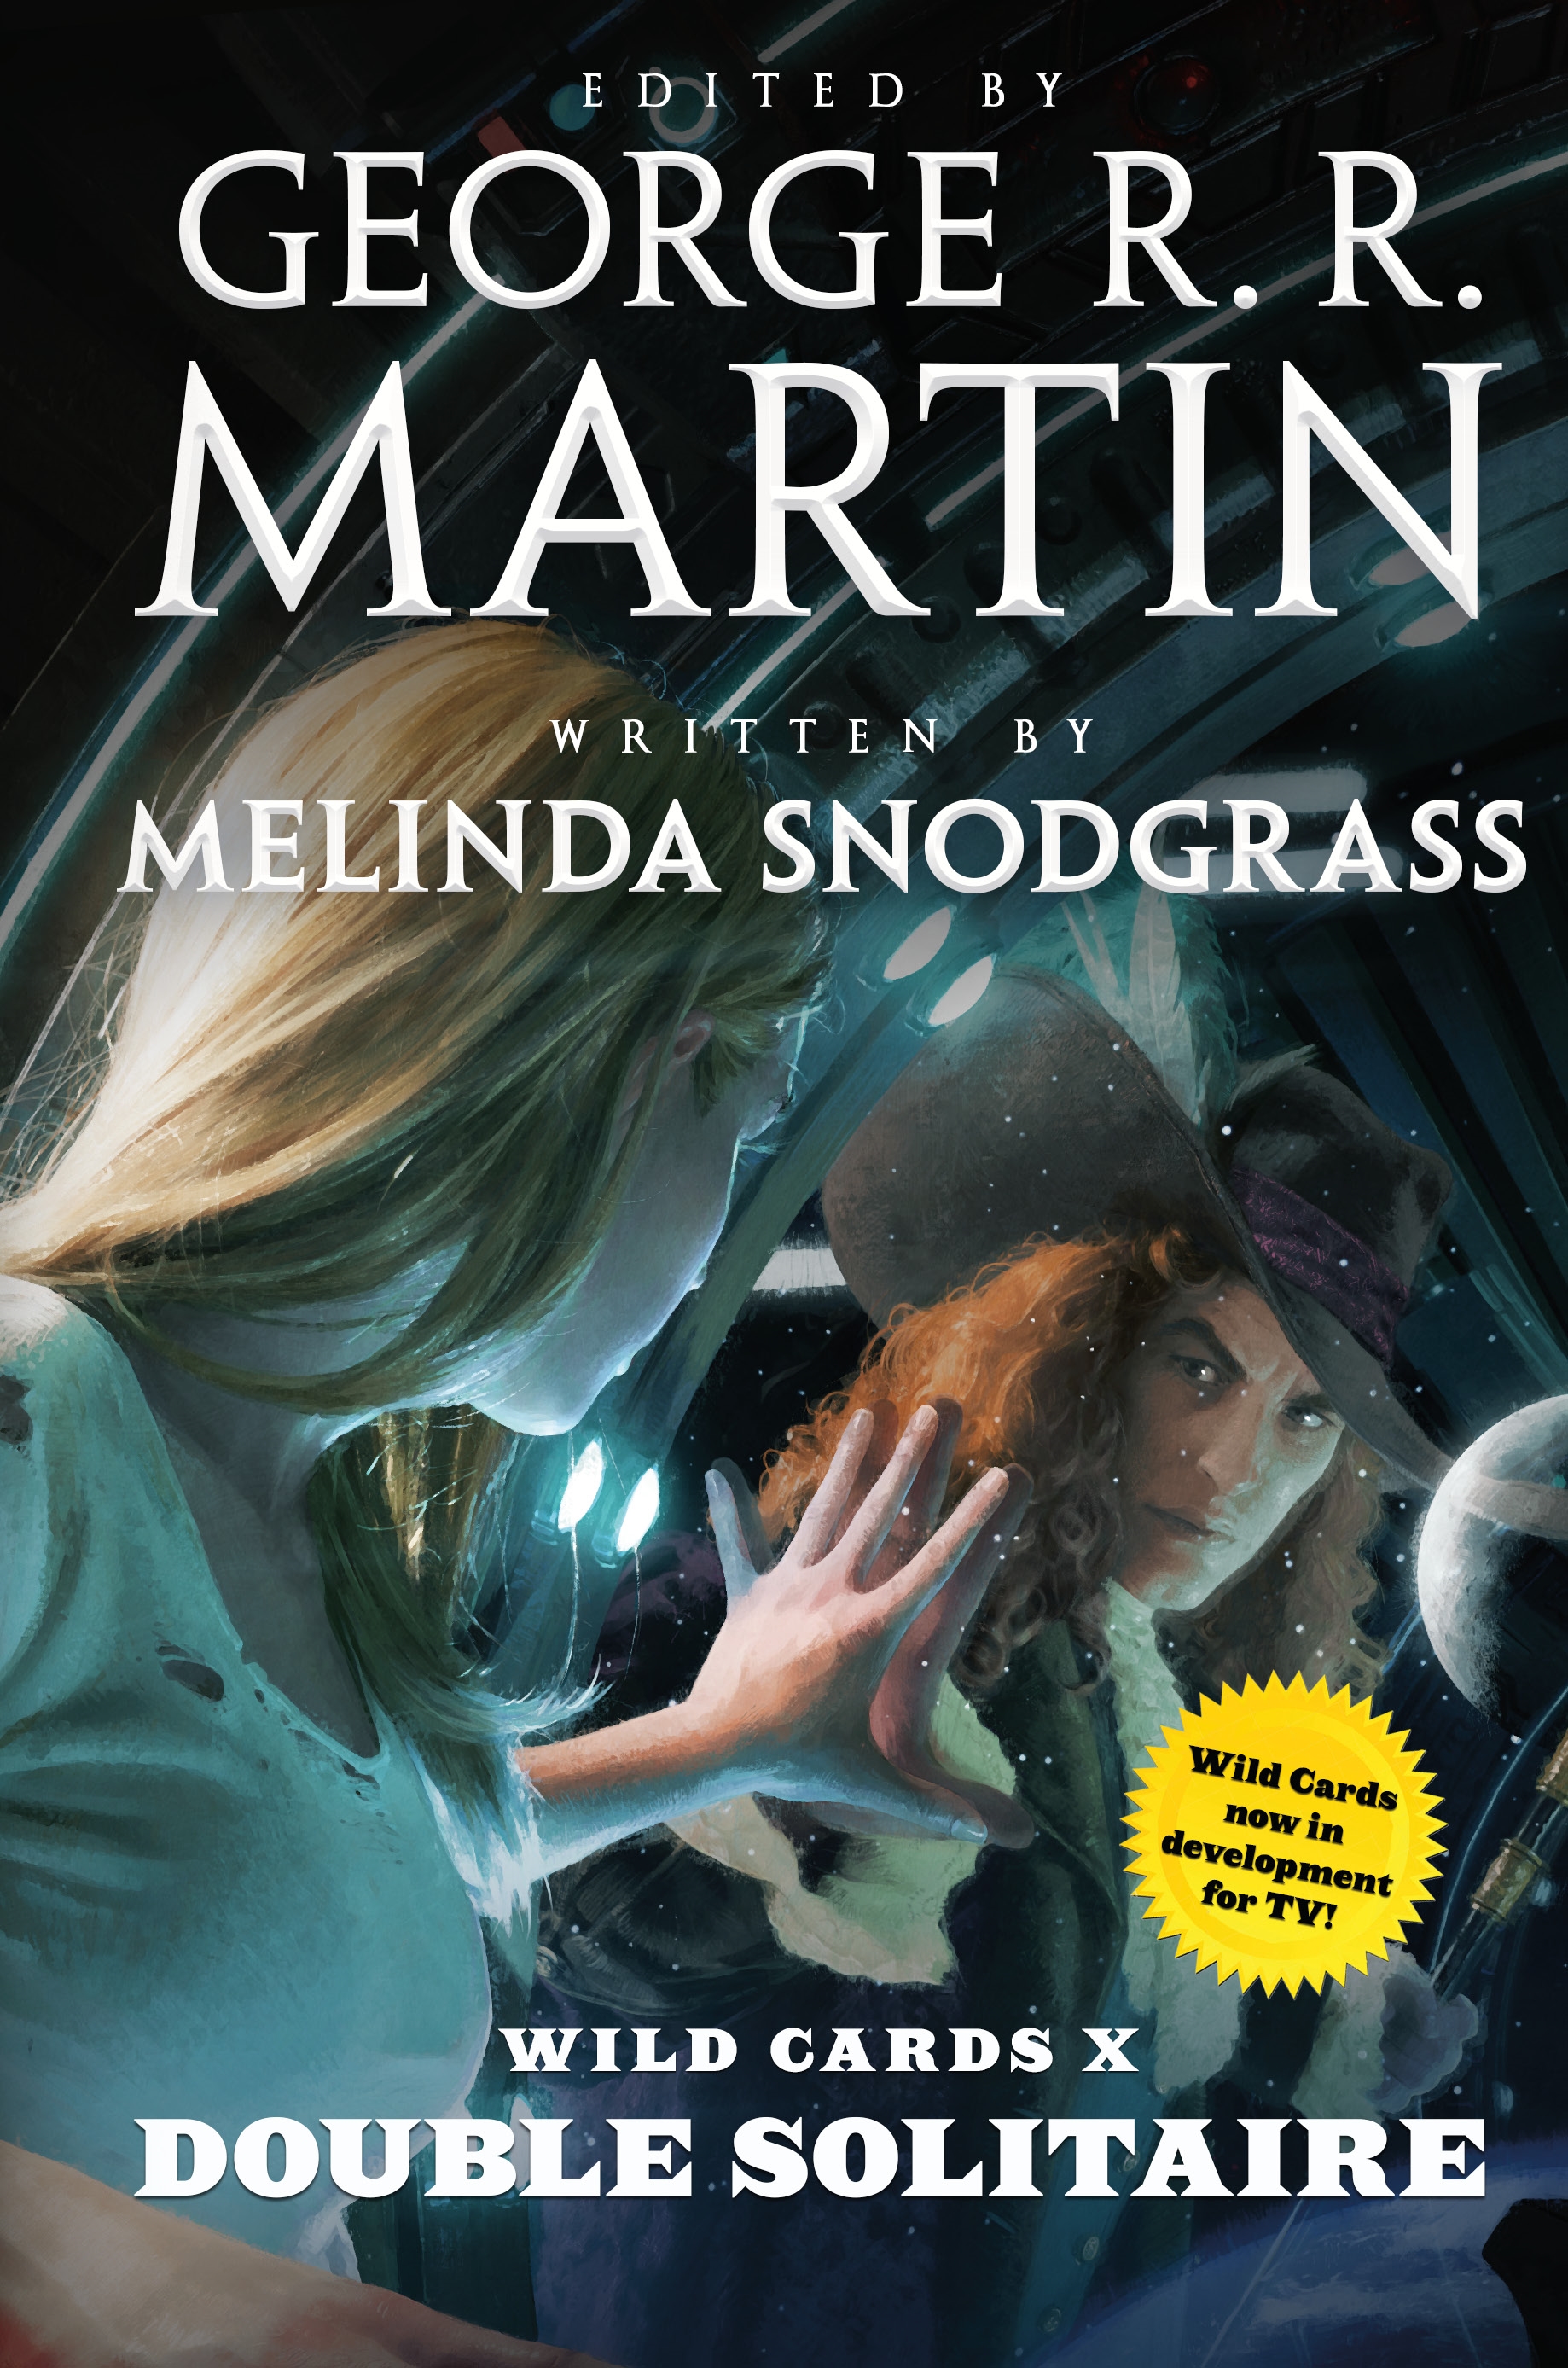 Wild Cards X: Double Solitaire by Melinda Snodgrass, George R. R. Martin